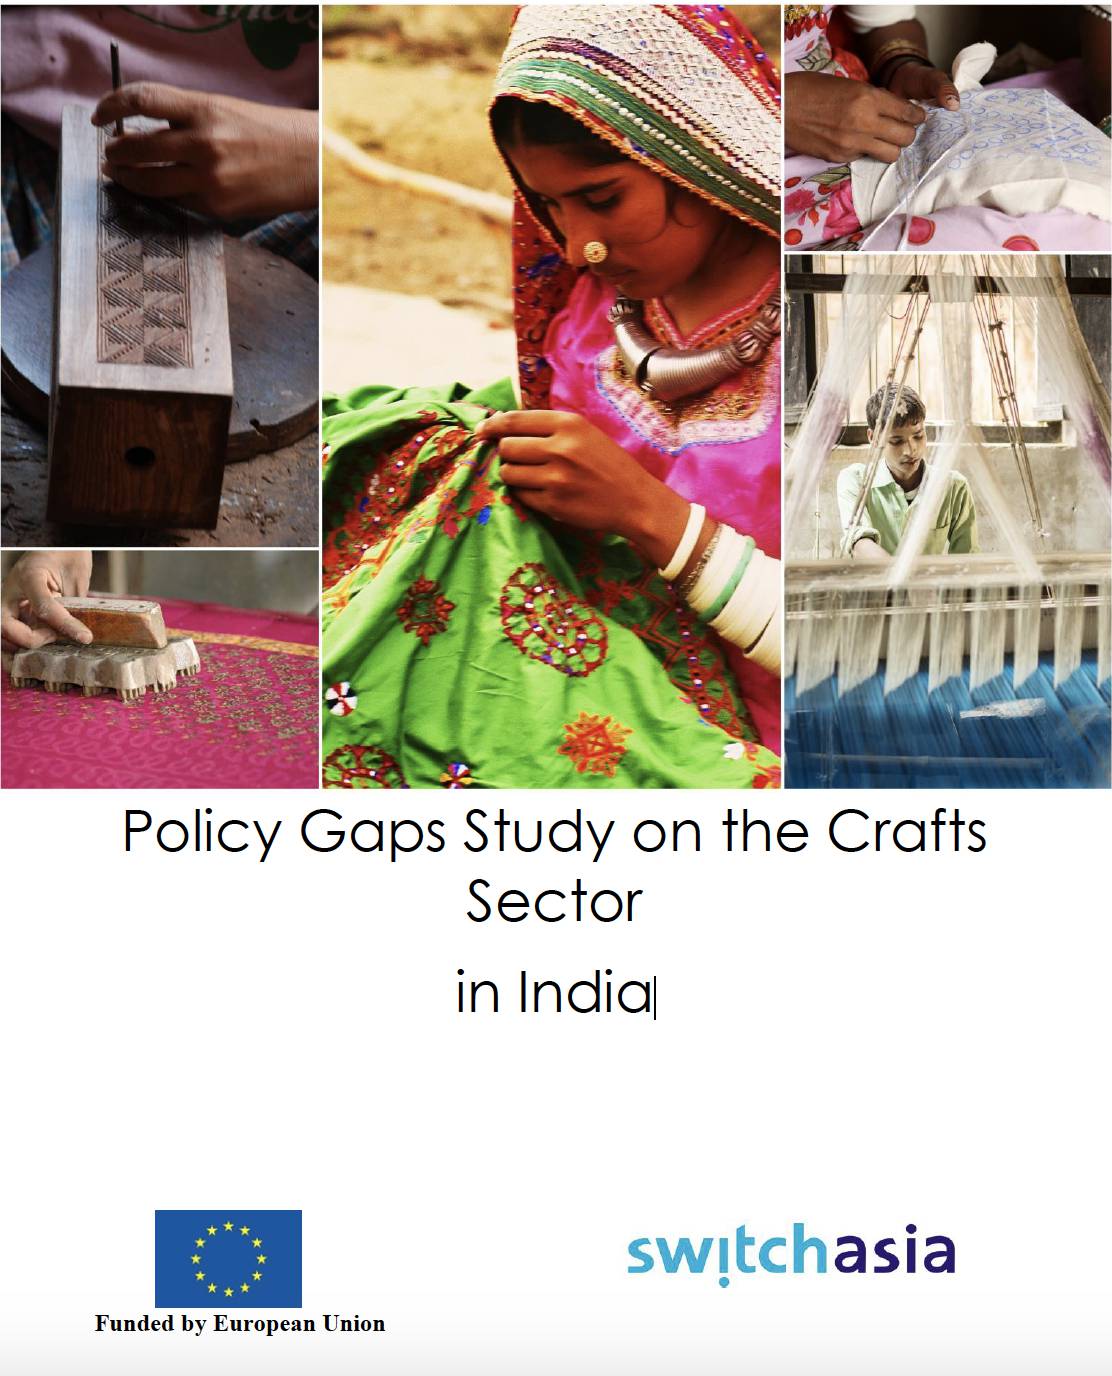 Policy Gaps Study on the Crafts Sector in India